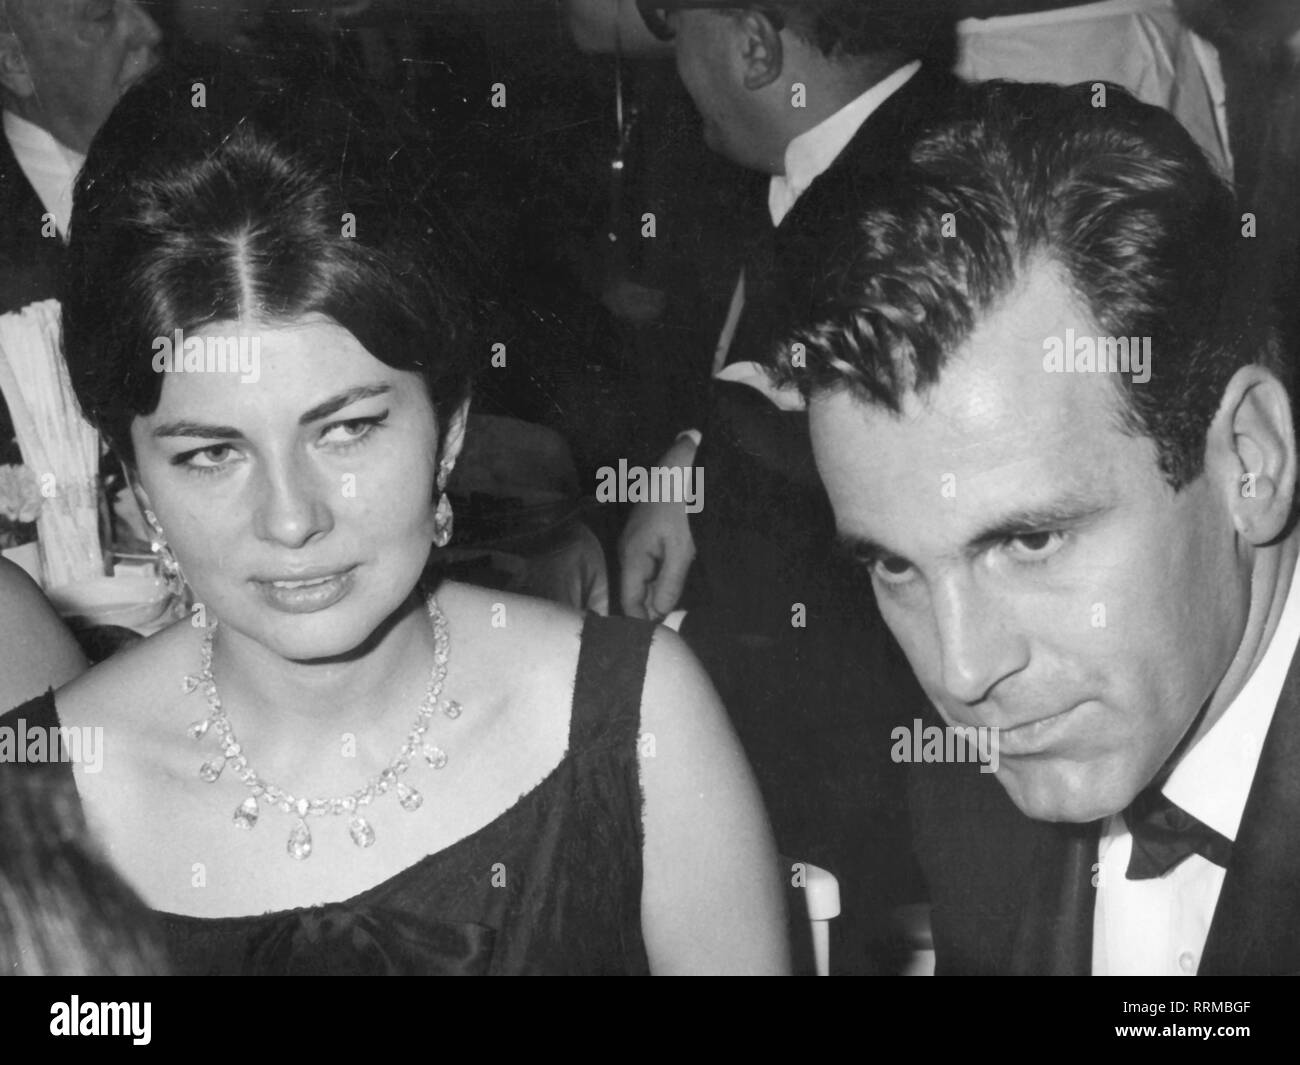 Soraya, 22.6.1932 - 25.10.2001, Empress of Persia 12.2.1951 - 6.4.1958, full length, with actor Maximilian Schell, re-opening of the National Theatre in Munich, 23.11.1963, Additional-Rights-Clearance-Info-Not-Available Stock Photo